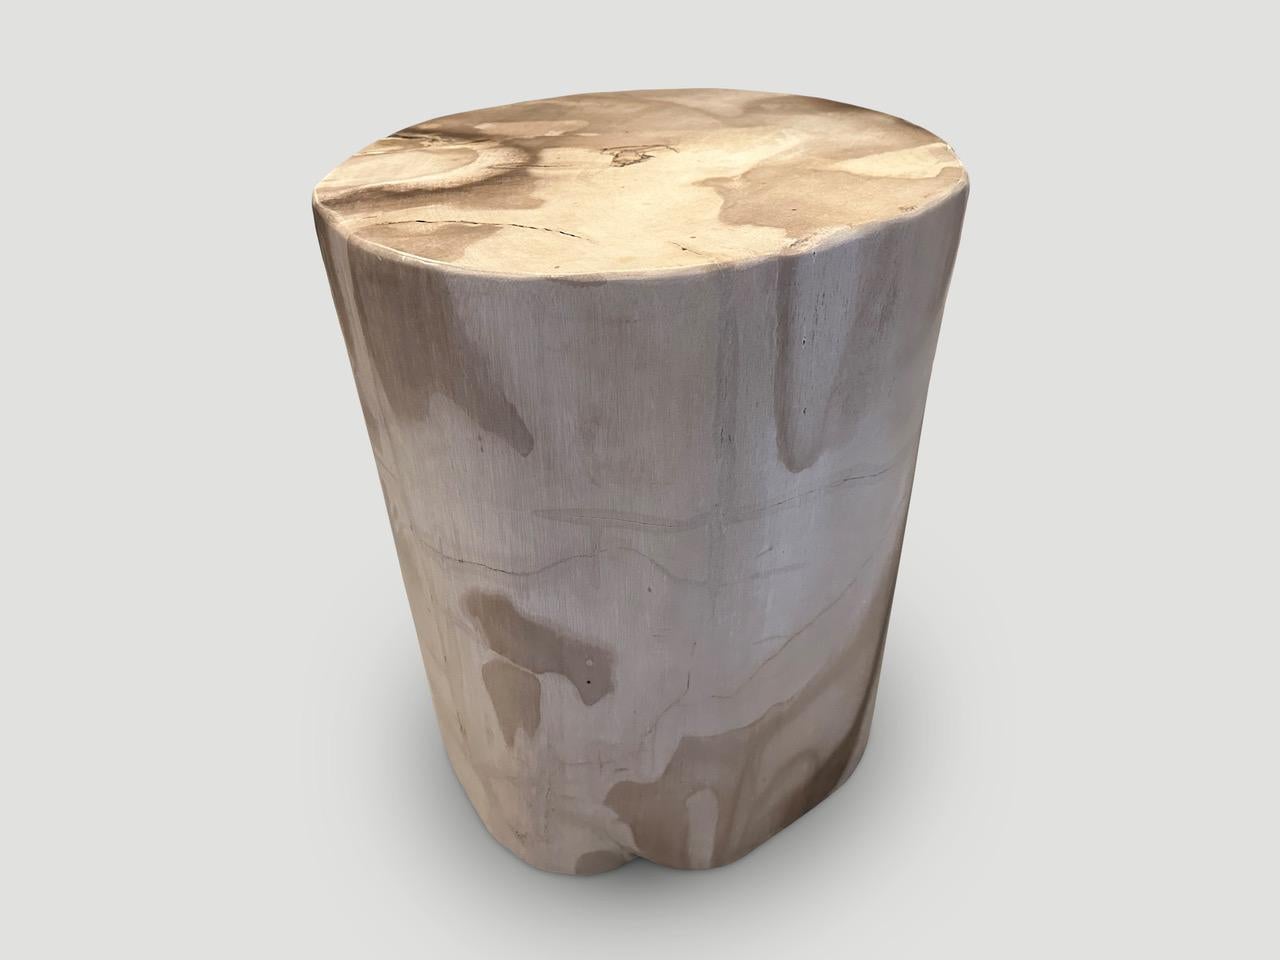 Impressive beautiful neutral tones and markings on this large high quality petrified wood side table. It’s fascinating how Mother Nature produces these exquisite 40 million year old petrified teak logs with such contrasting colors and natural